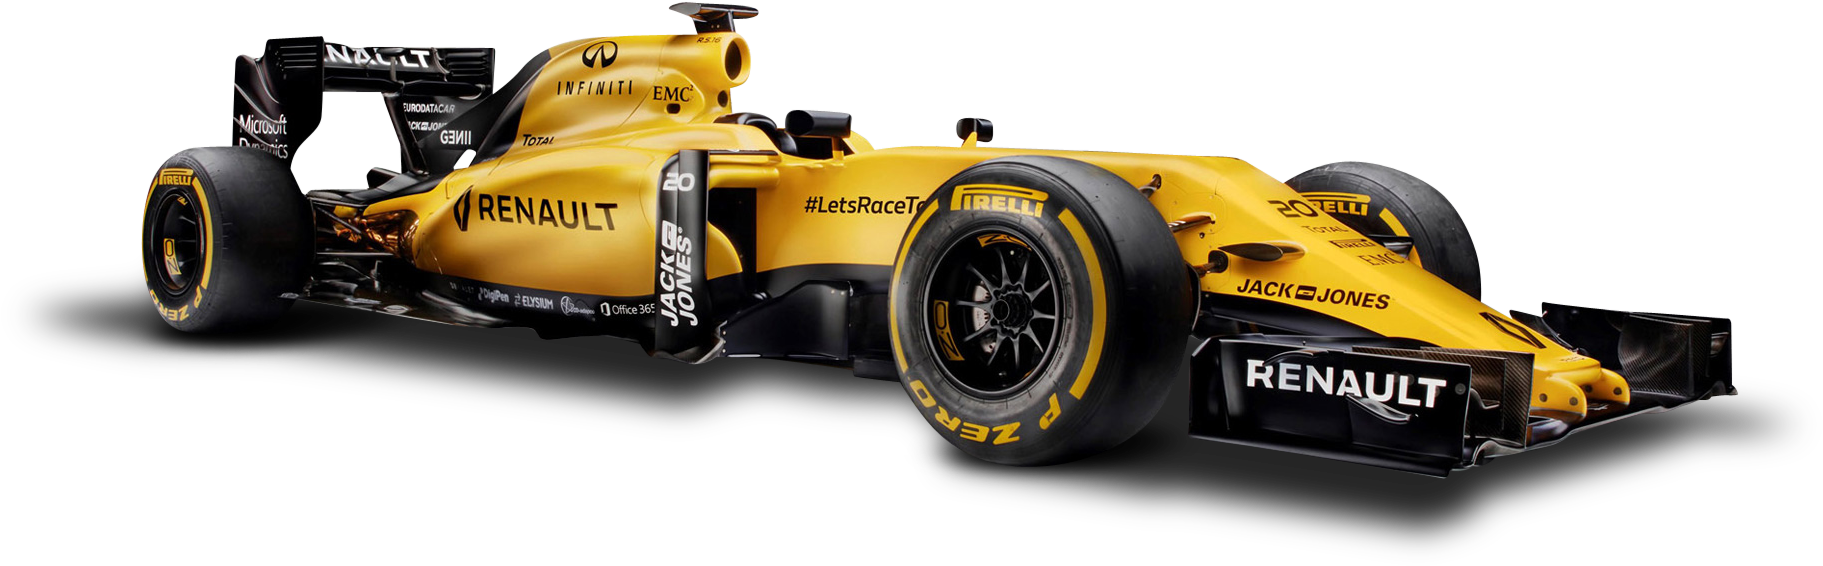 Renault F1 Race Car Side View